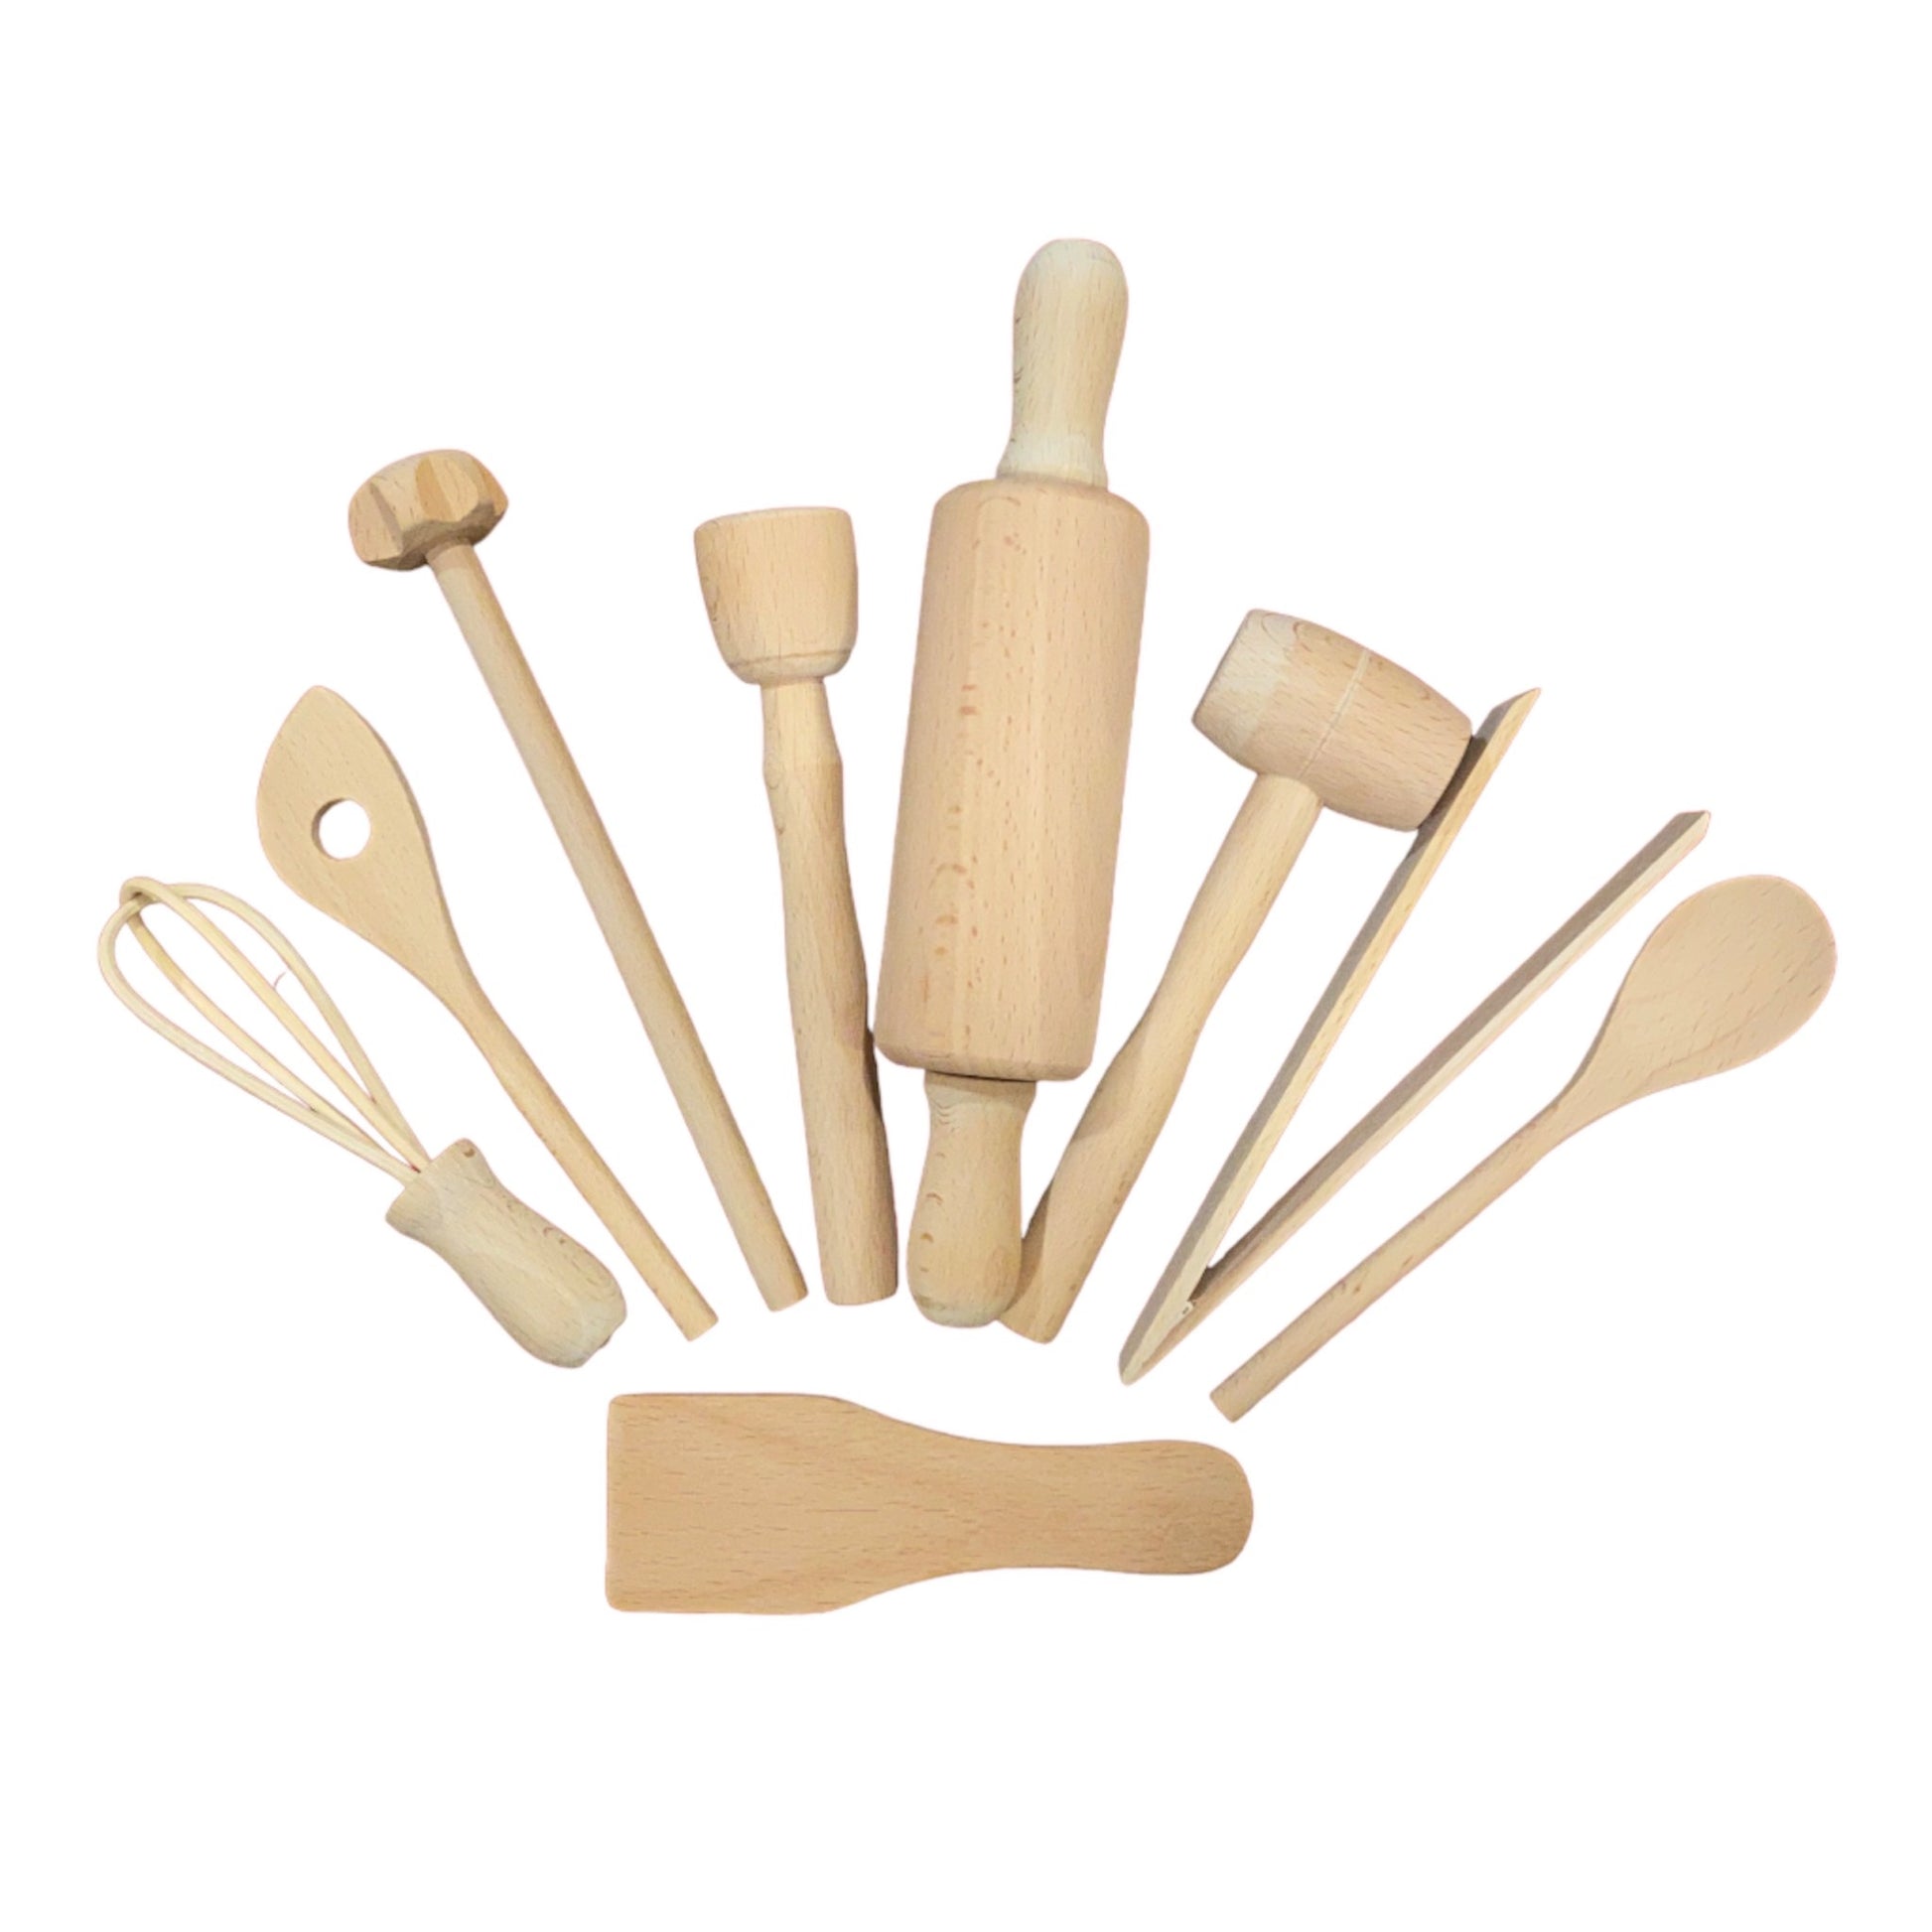 Beechwood Kids Cooking/Baking Tools Set - 9 Pieces, Eco-Friendly Toys,  Plastic-free – R&B The Change